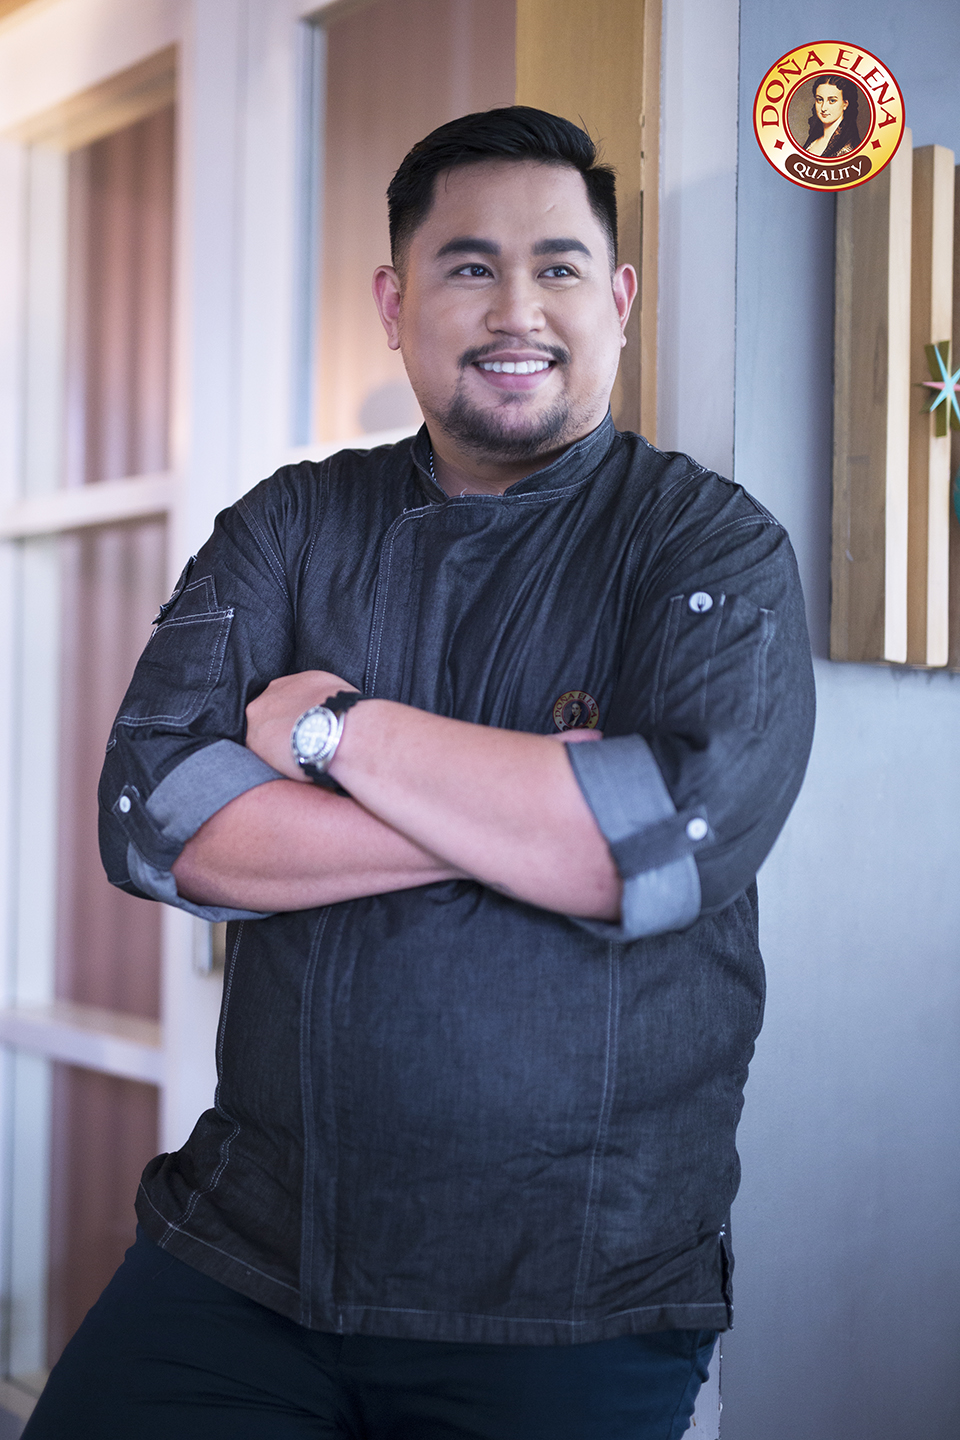 Chef Mikel Zaguirre